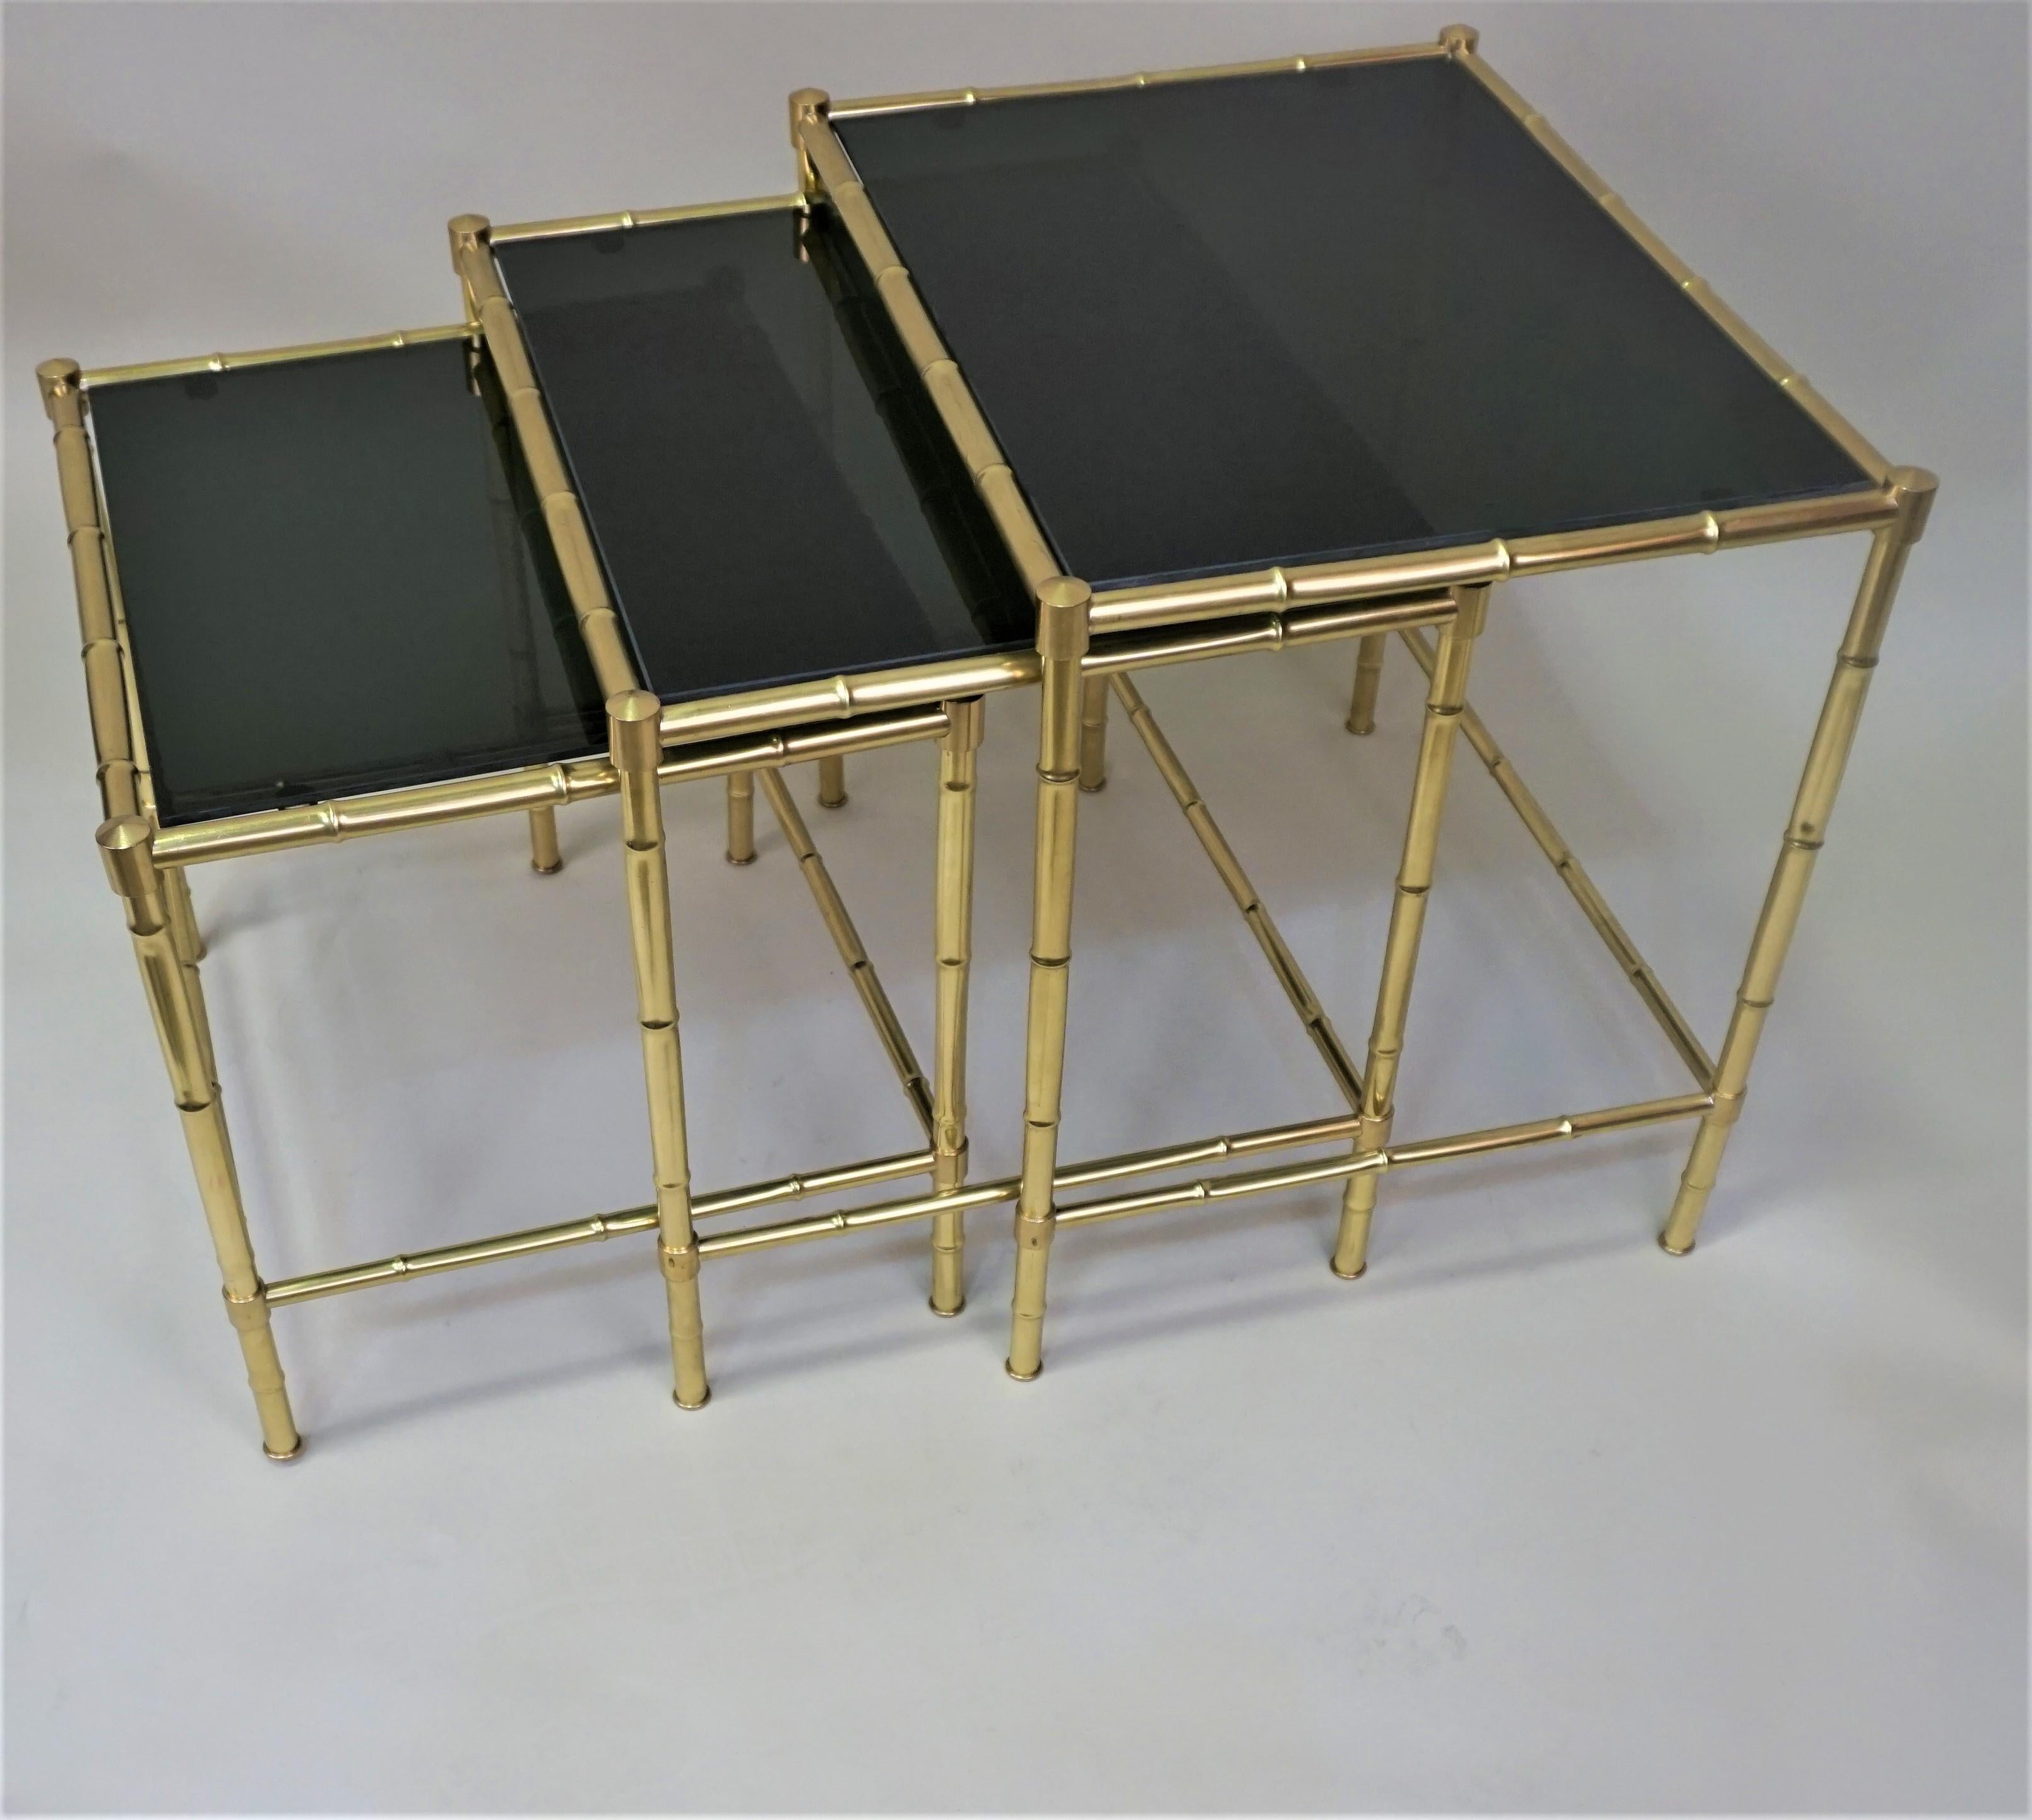 Set of three faux bamboo bronze nesting tables with smoked black tops.
Measurement :
15.5